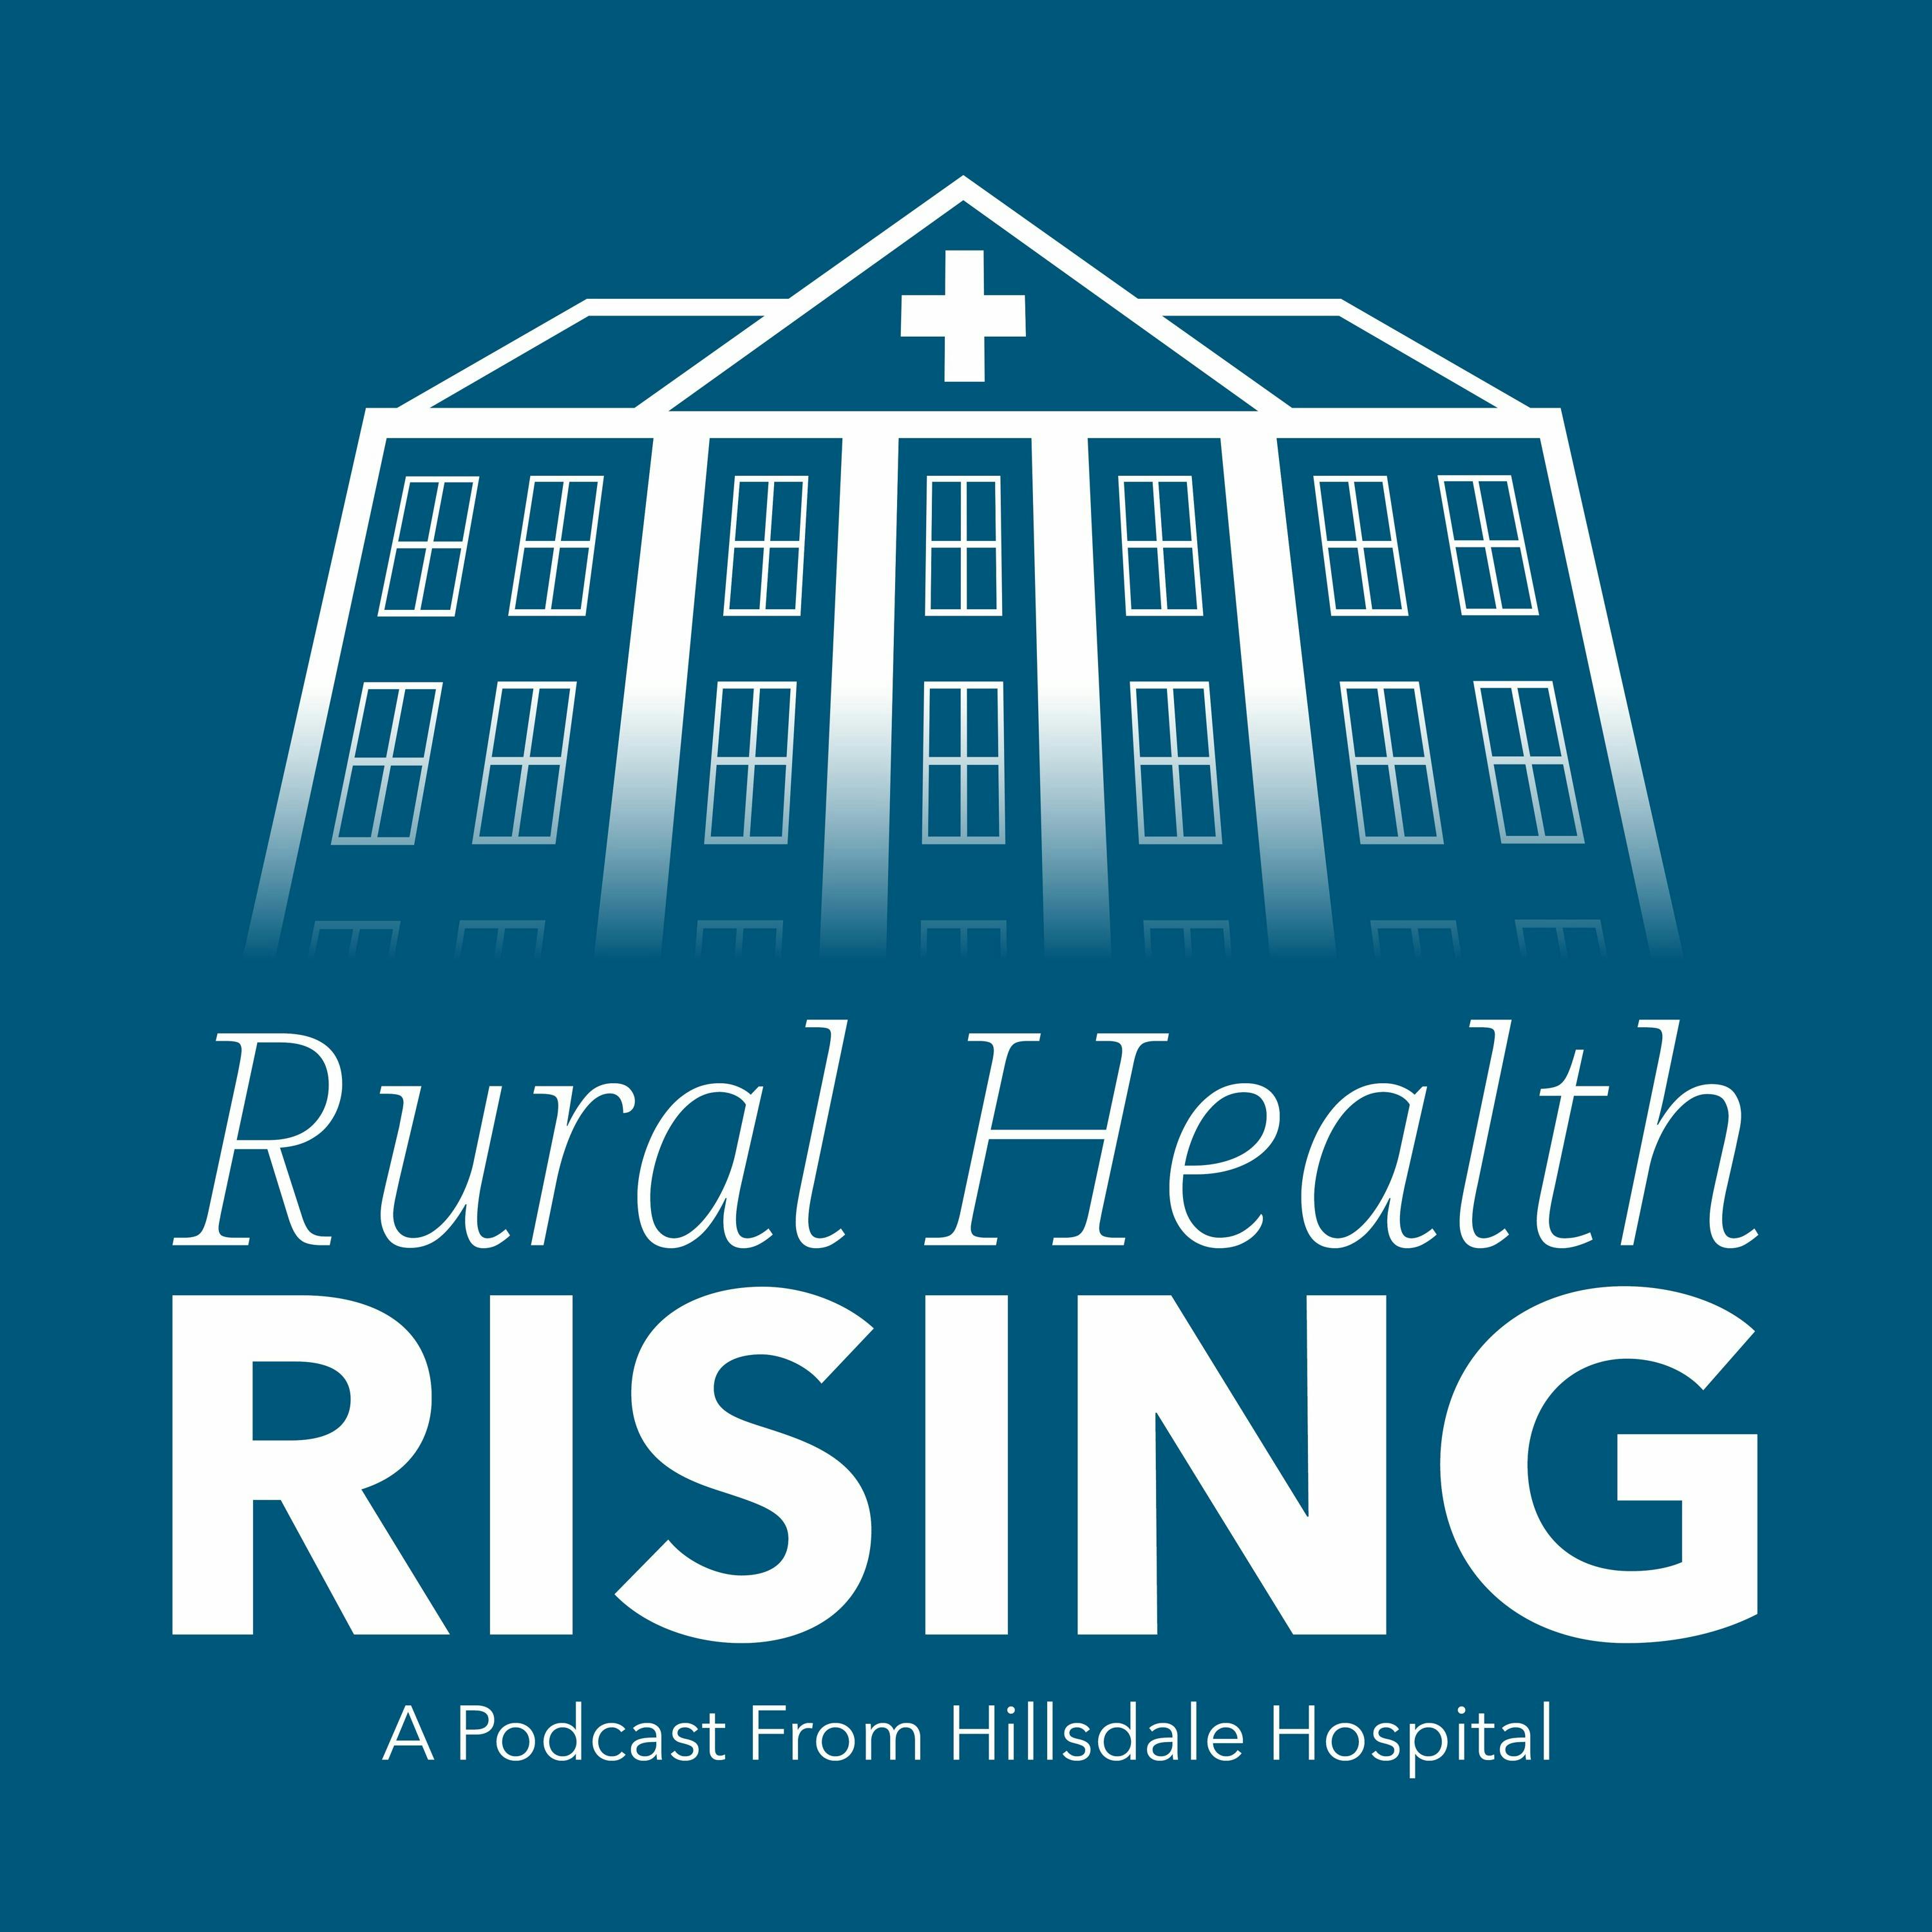 Episode 13: The 5 Ps of Rural Health: Population